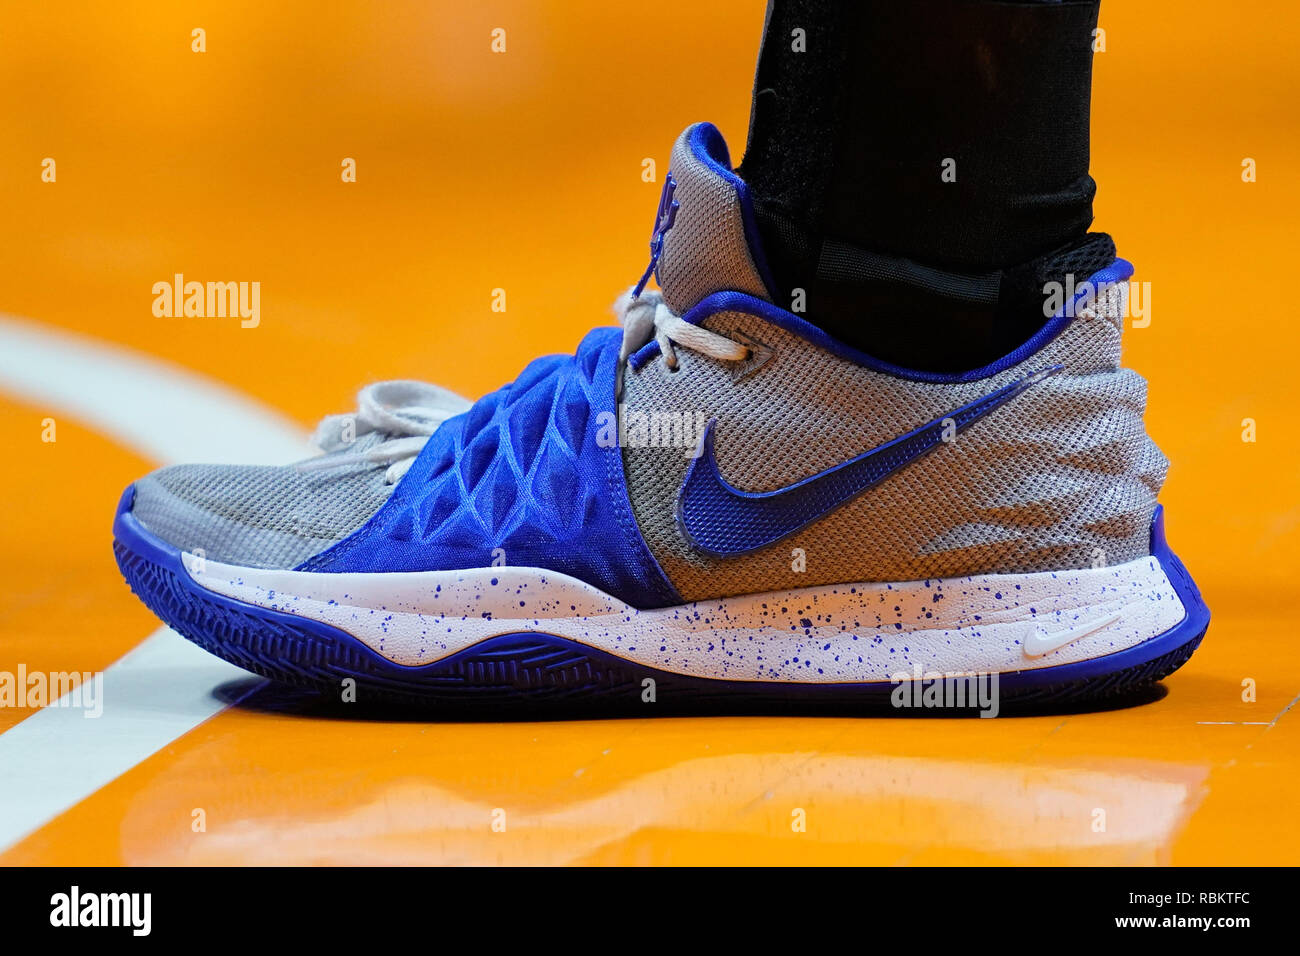 January 10, 2019: Kentucky Wildcats shoe during the NCAA basketball game  between the University of Tennessee Lady Volunteers and the University of  Kentucky Wildcats at Thompson Boling Arena in Knoxville TN Tim